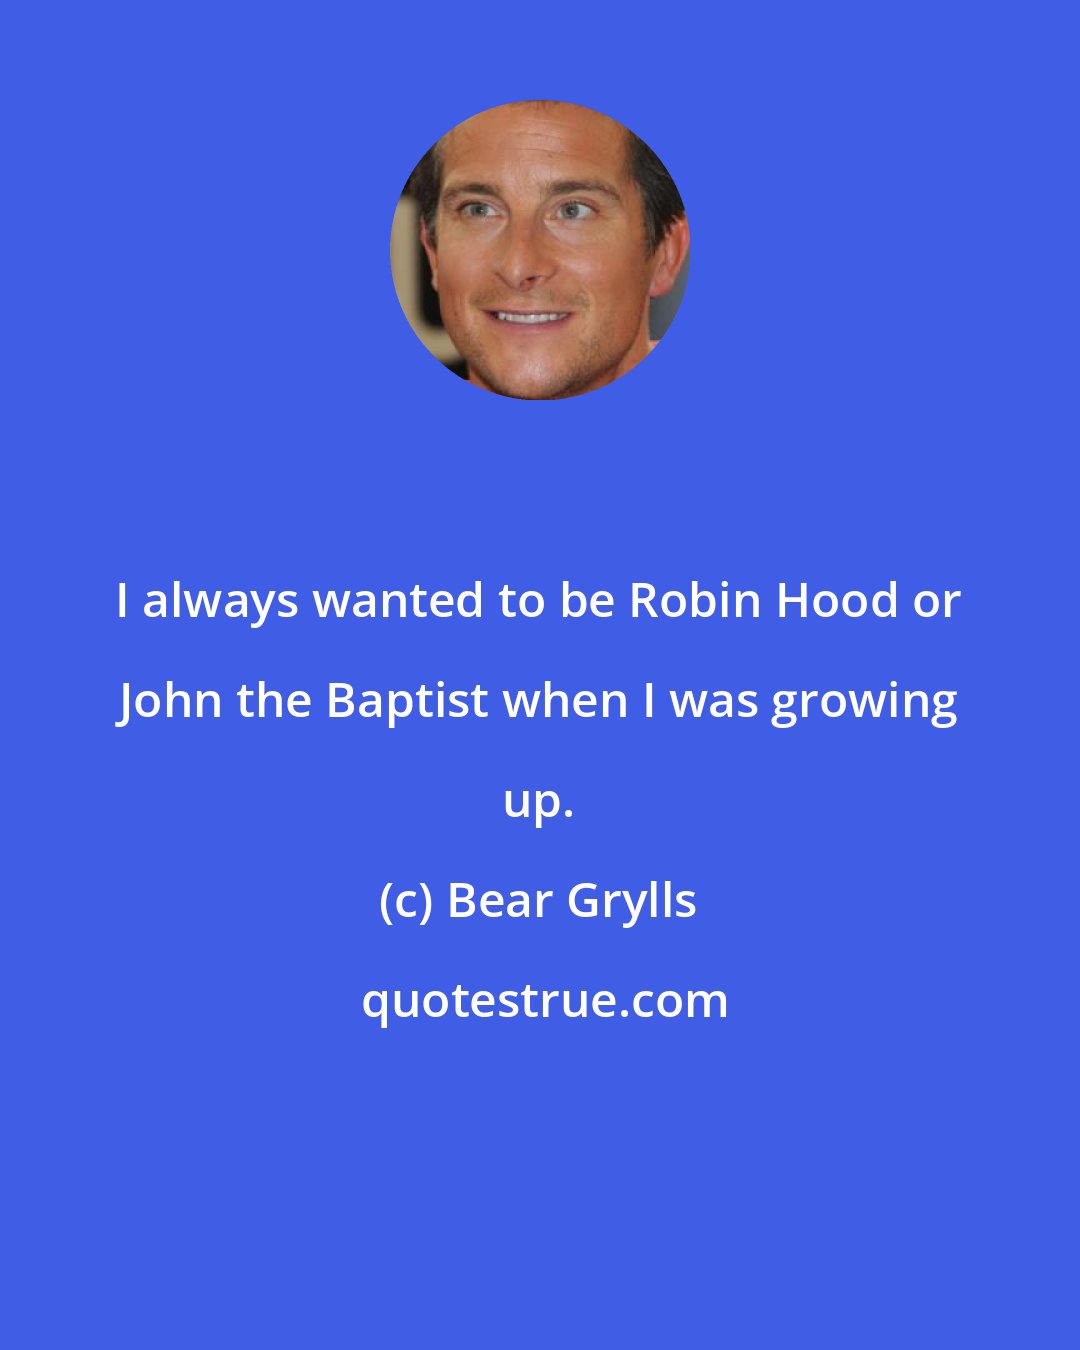 Bear Grylls: I always wanted to be Robin Hood or John the Baptist when I was growing up.